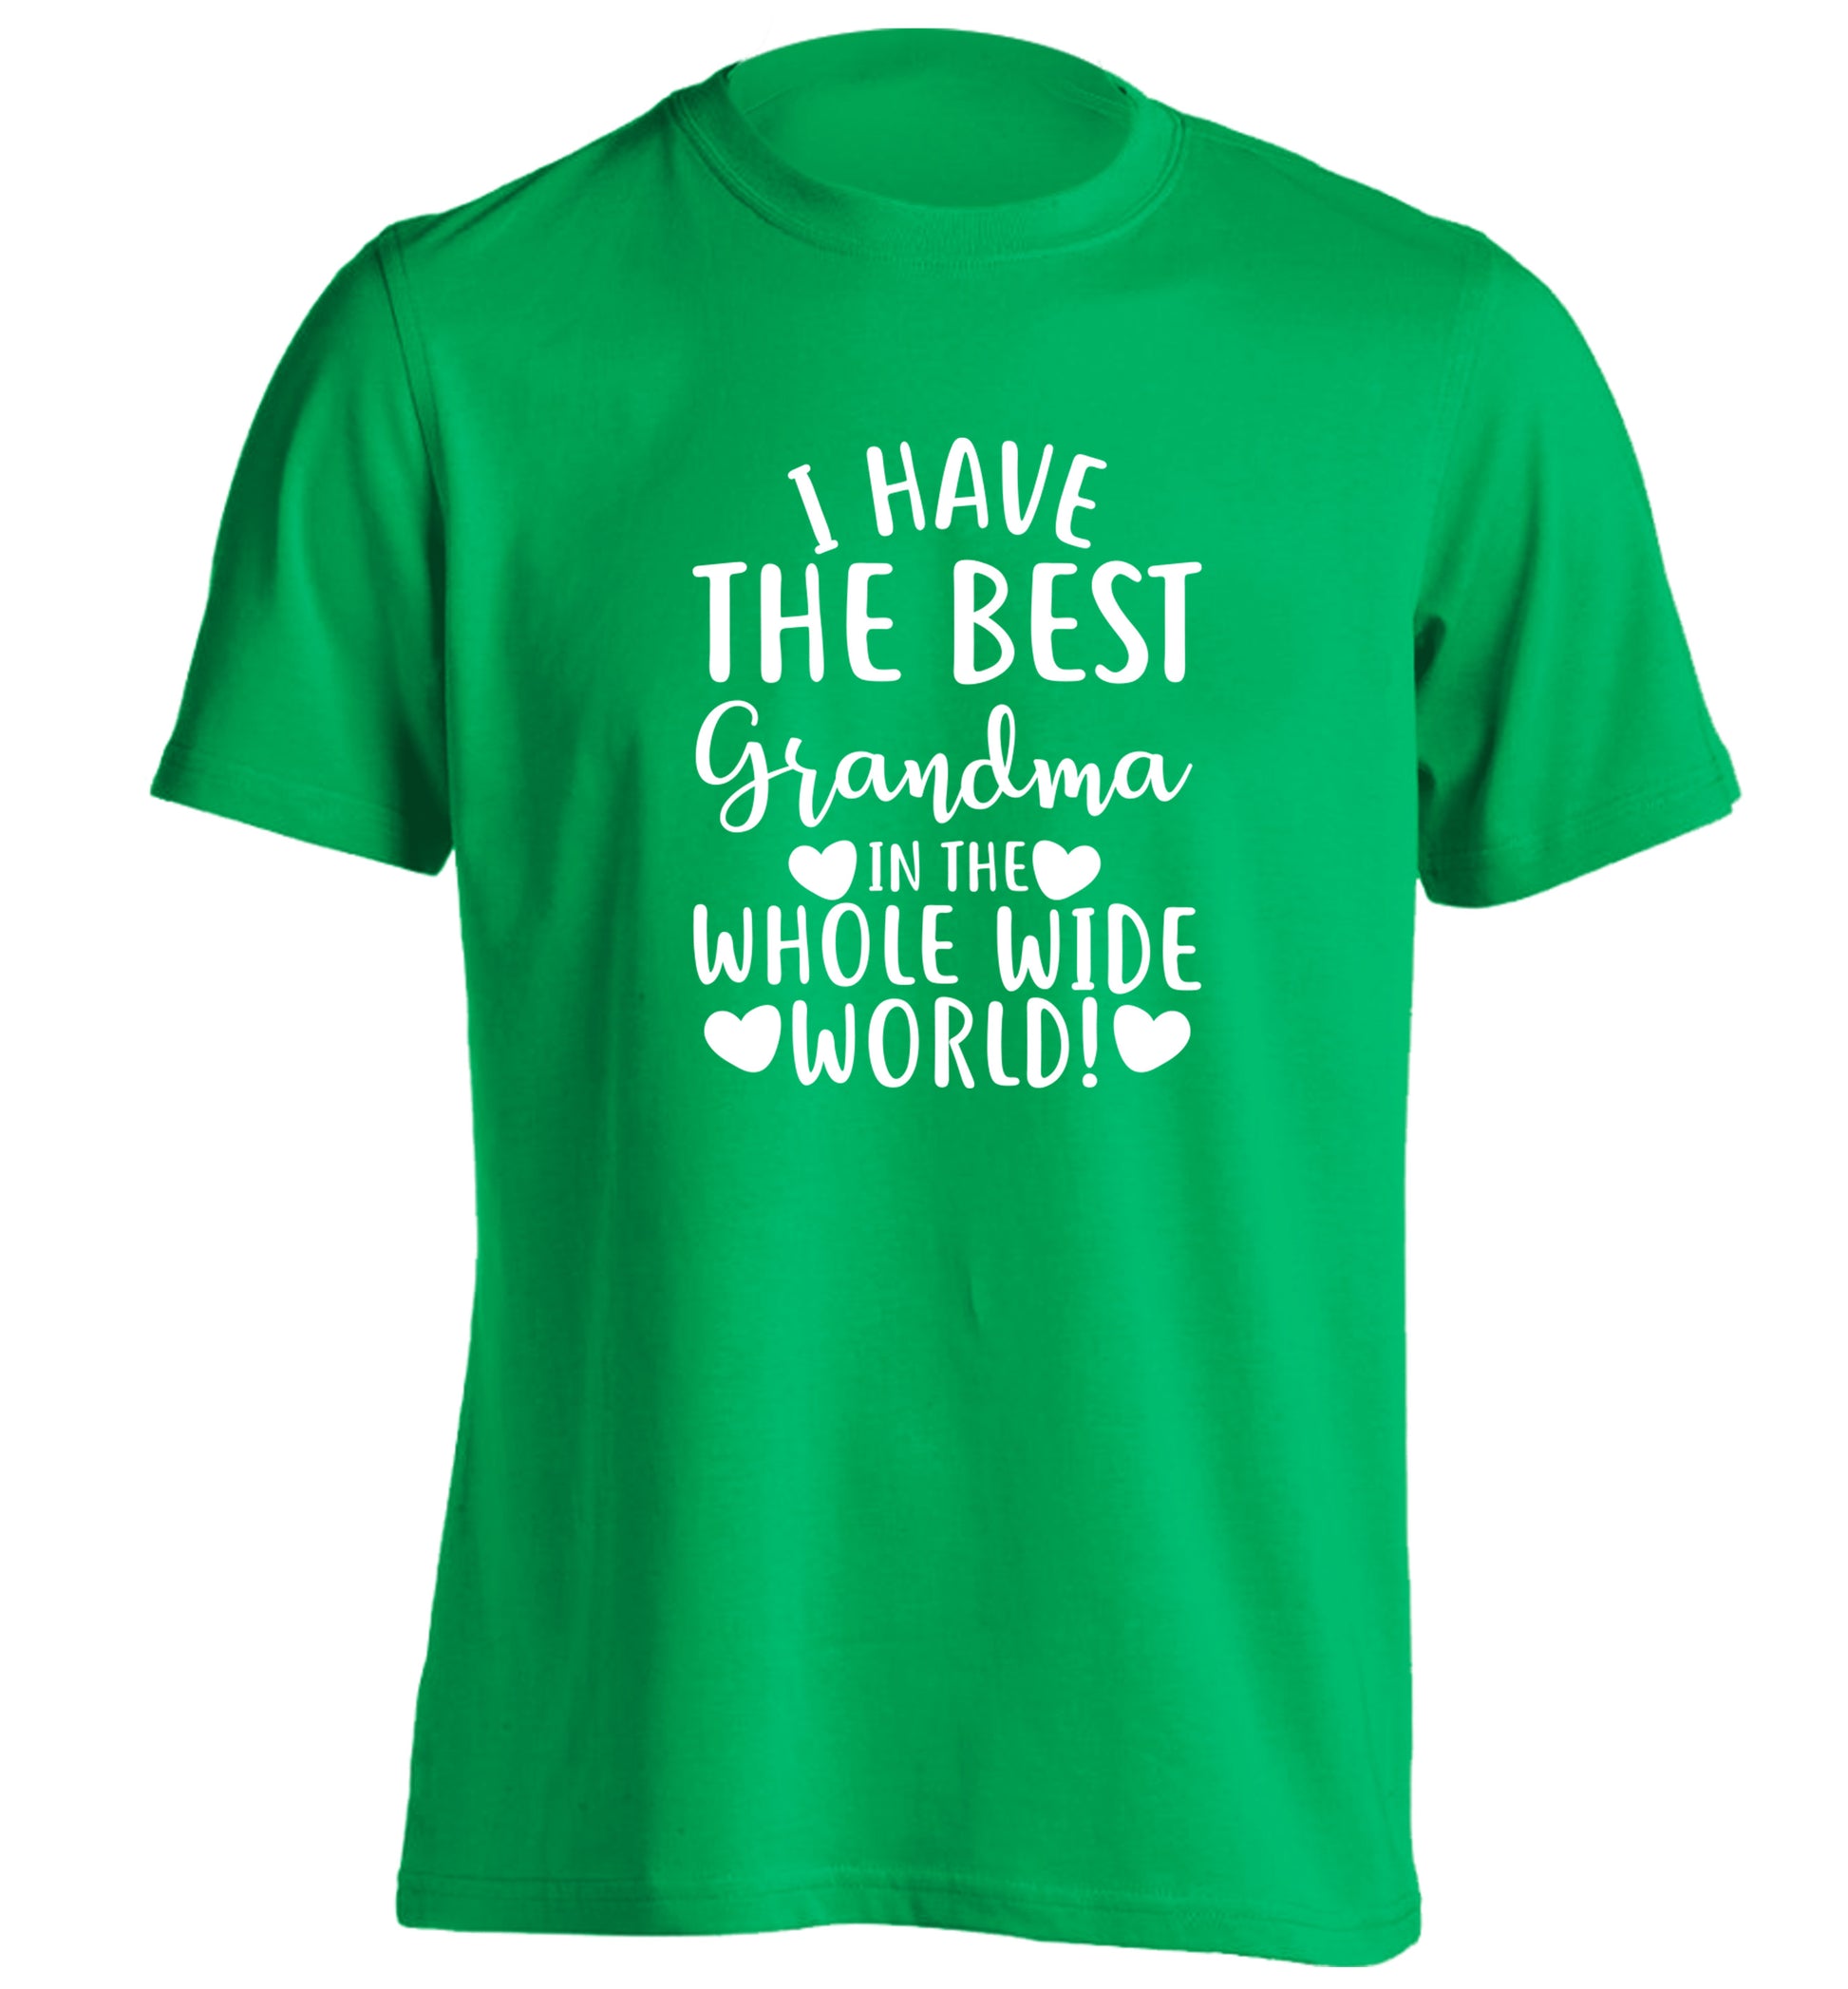 I have the best grandma in the whole wide world! adults unisex green Tshirt 2XL